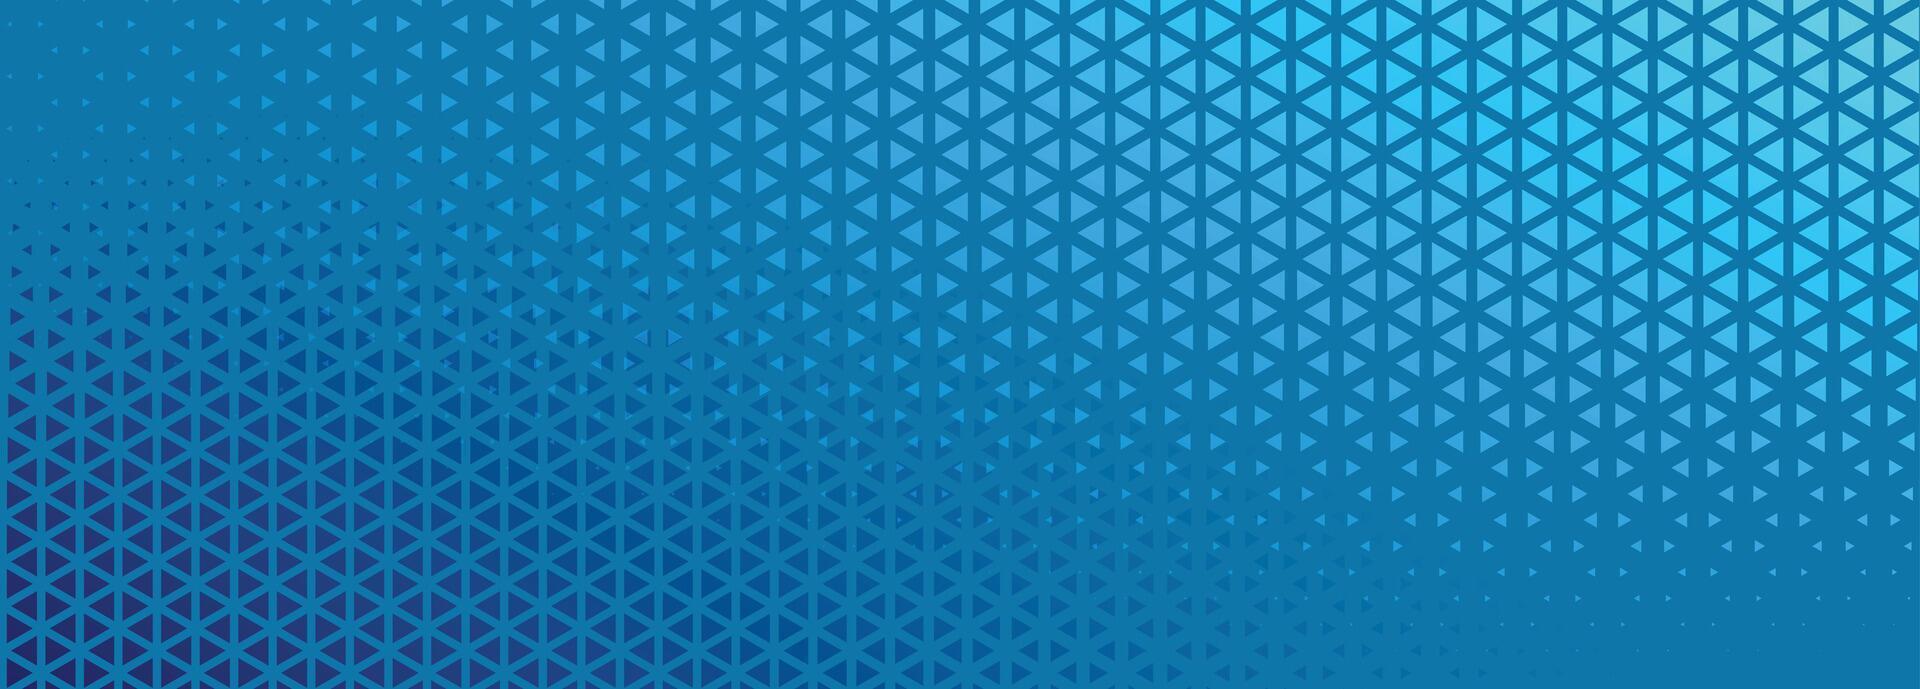 blue halftone banner with triangle shapes design vector